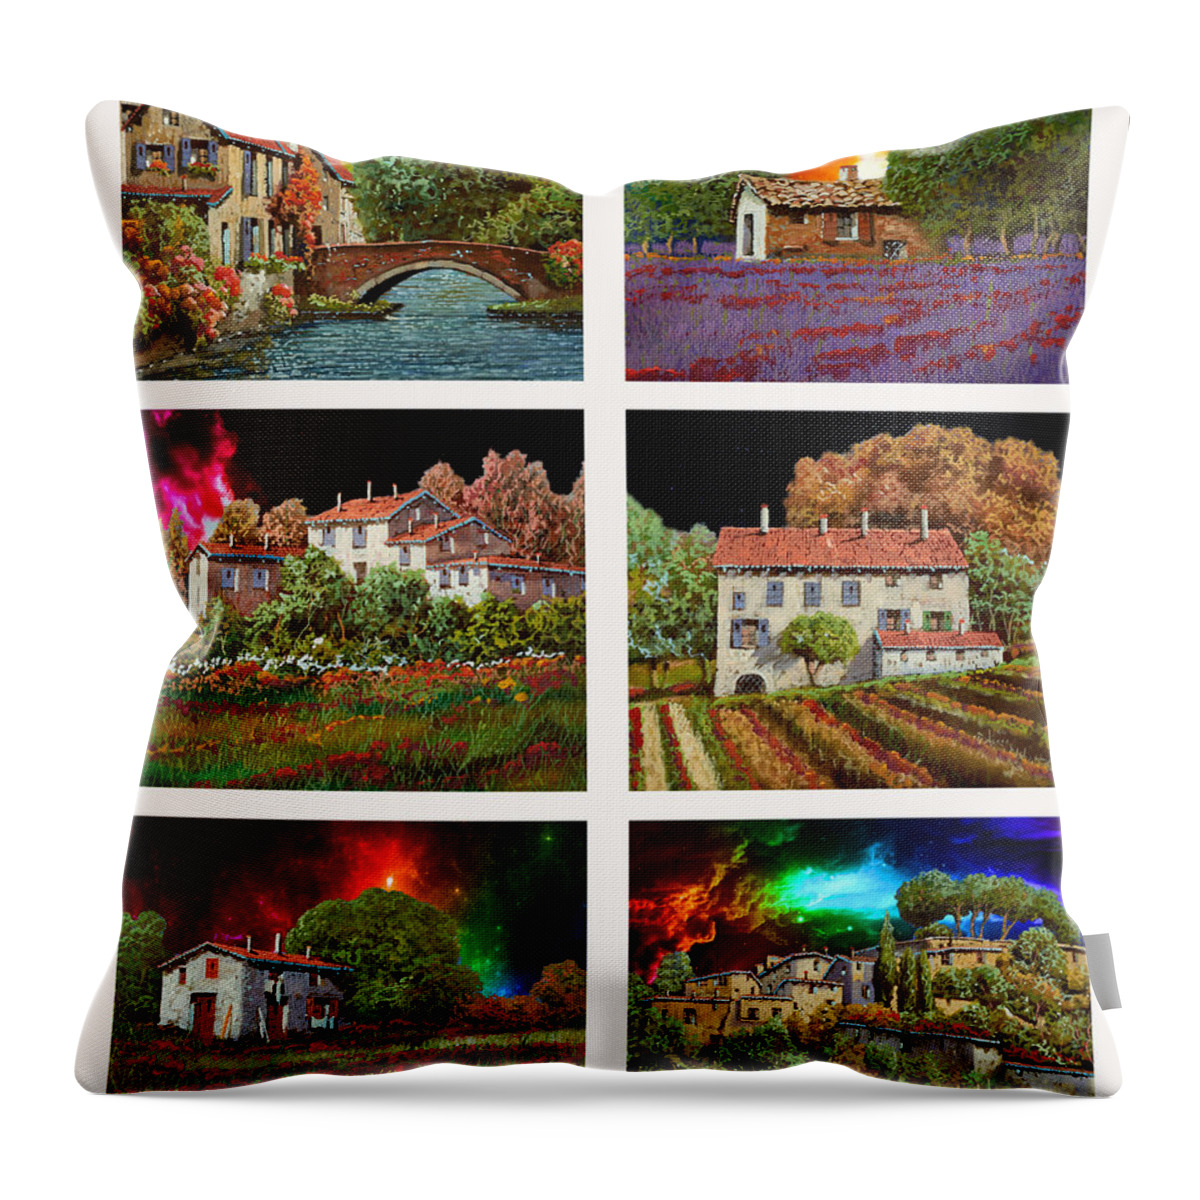 Sky Colors Throw Pillow featuring the painting I Colori Del Cielo by Guido Borelli